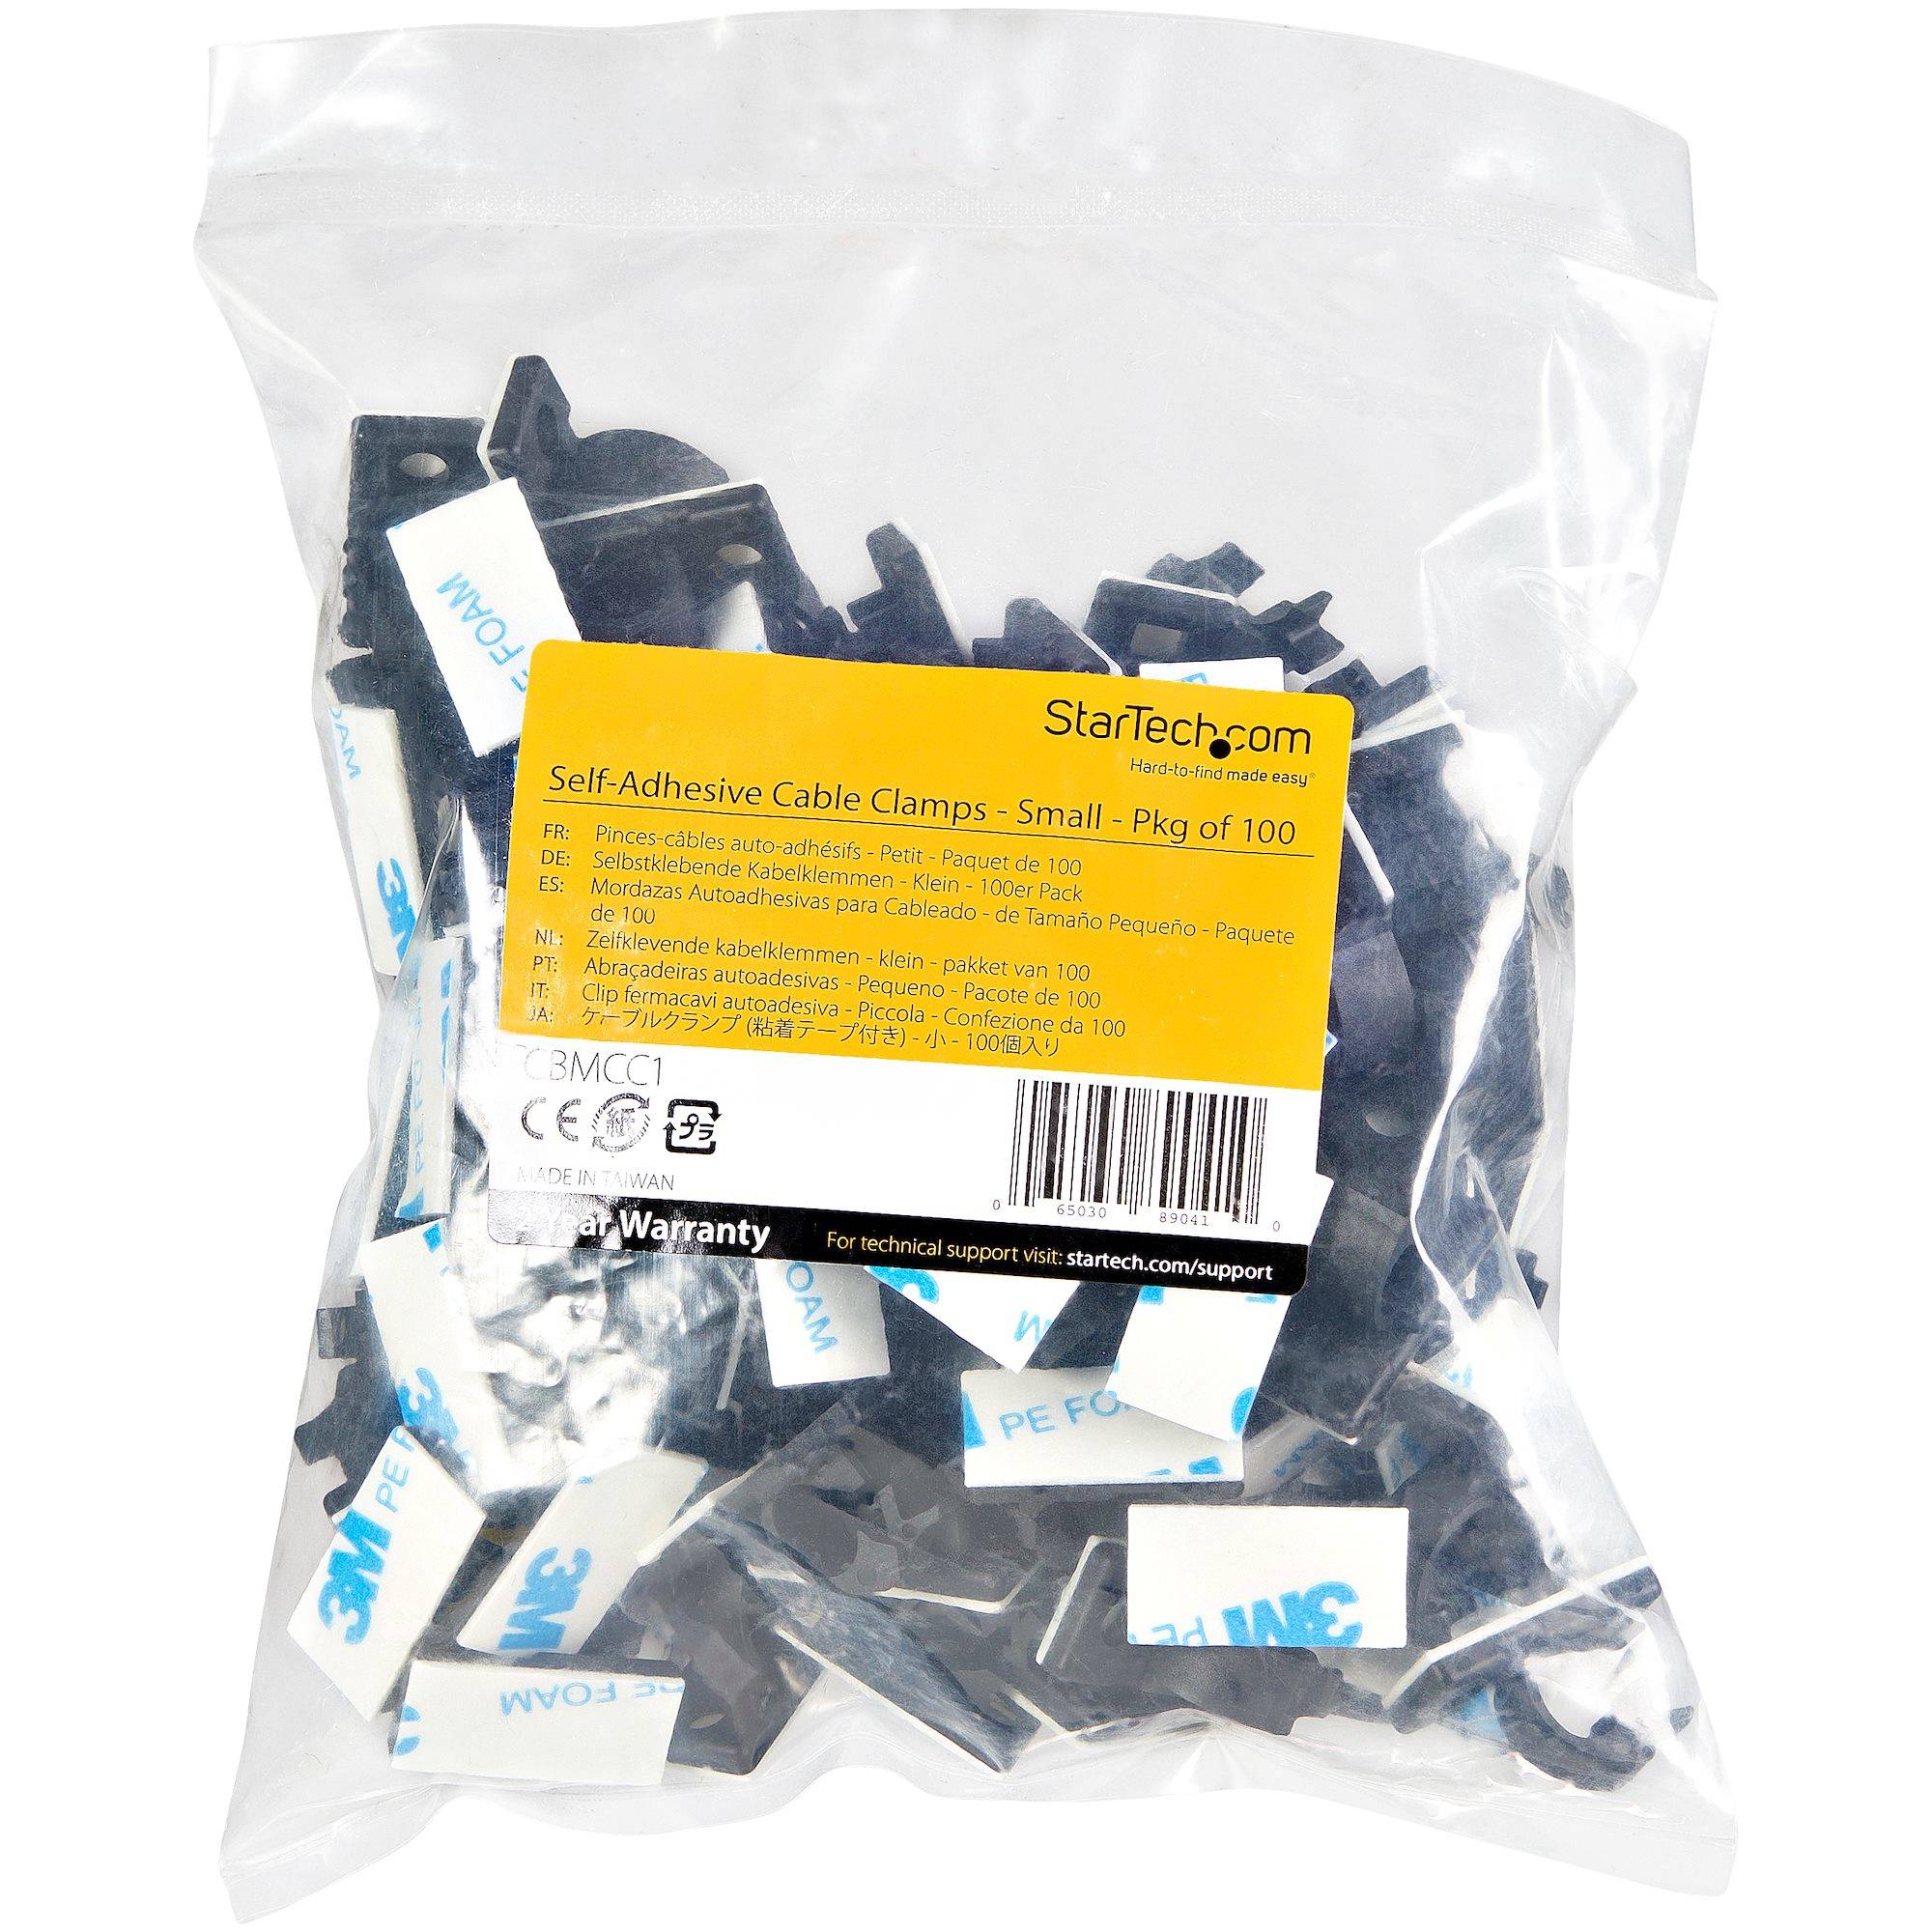 Rca Informatique - image du produit : 100 PACK OF SELF-ADHESIVE CABLE CLAMP SMALL